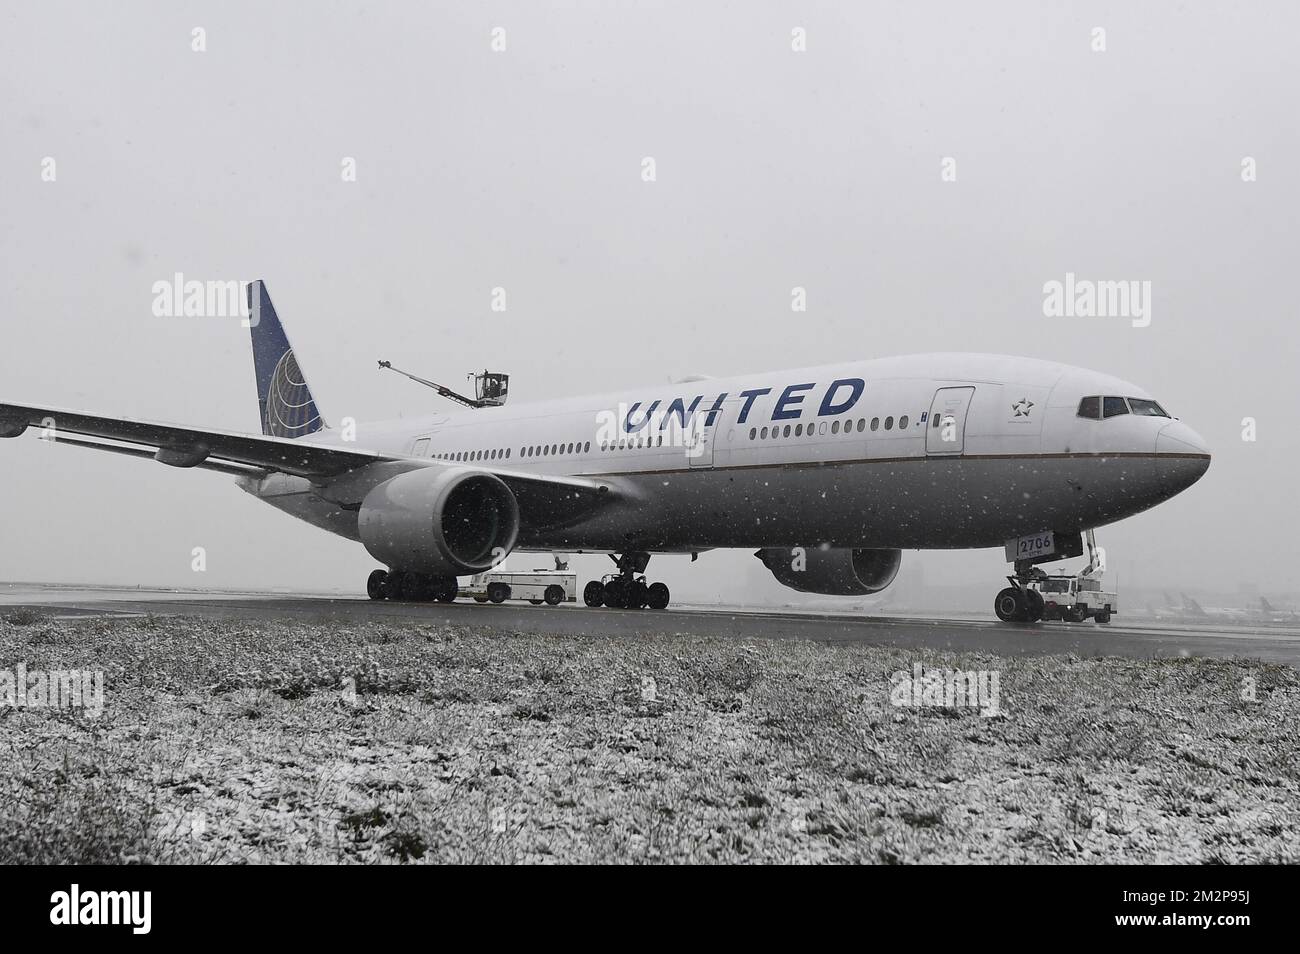 Illustration picture shows a plane of United on the tarmac of Brussels Airport, Belgium, Wednesday 30 January 2019. A new snow streak has touched Belgium. BELGA PHOTO DIRK WAEM  Stock Photo